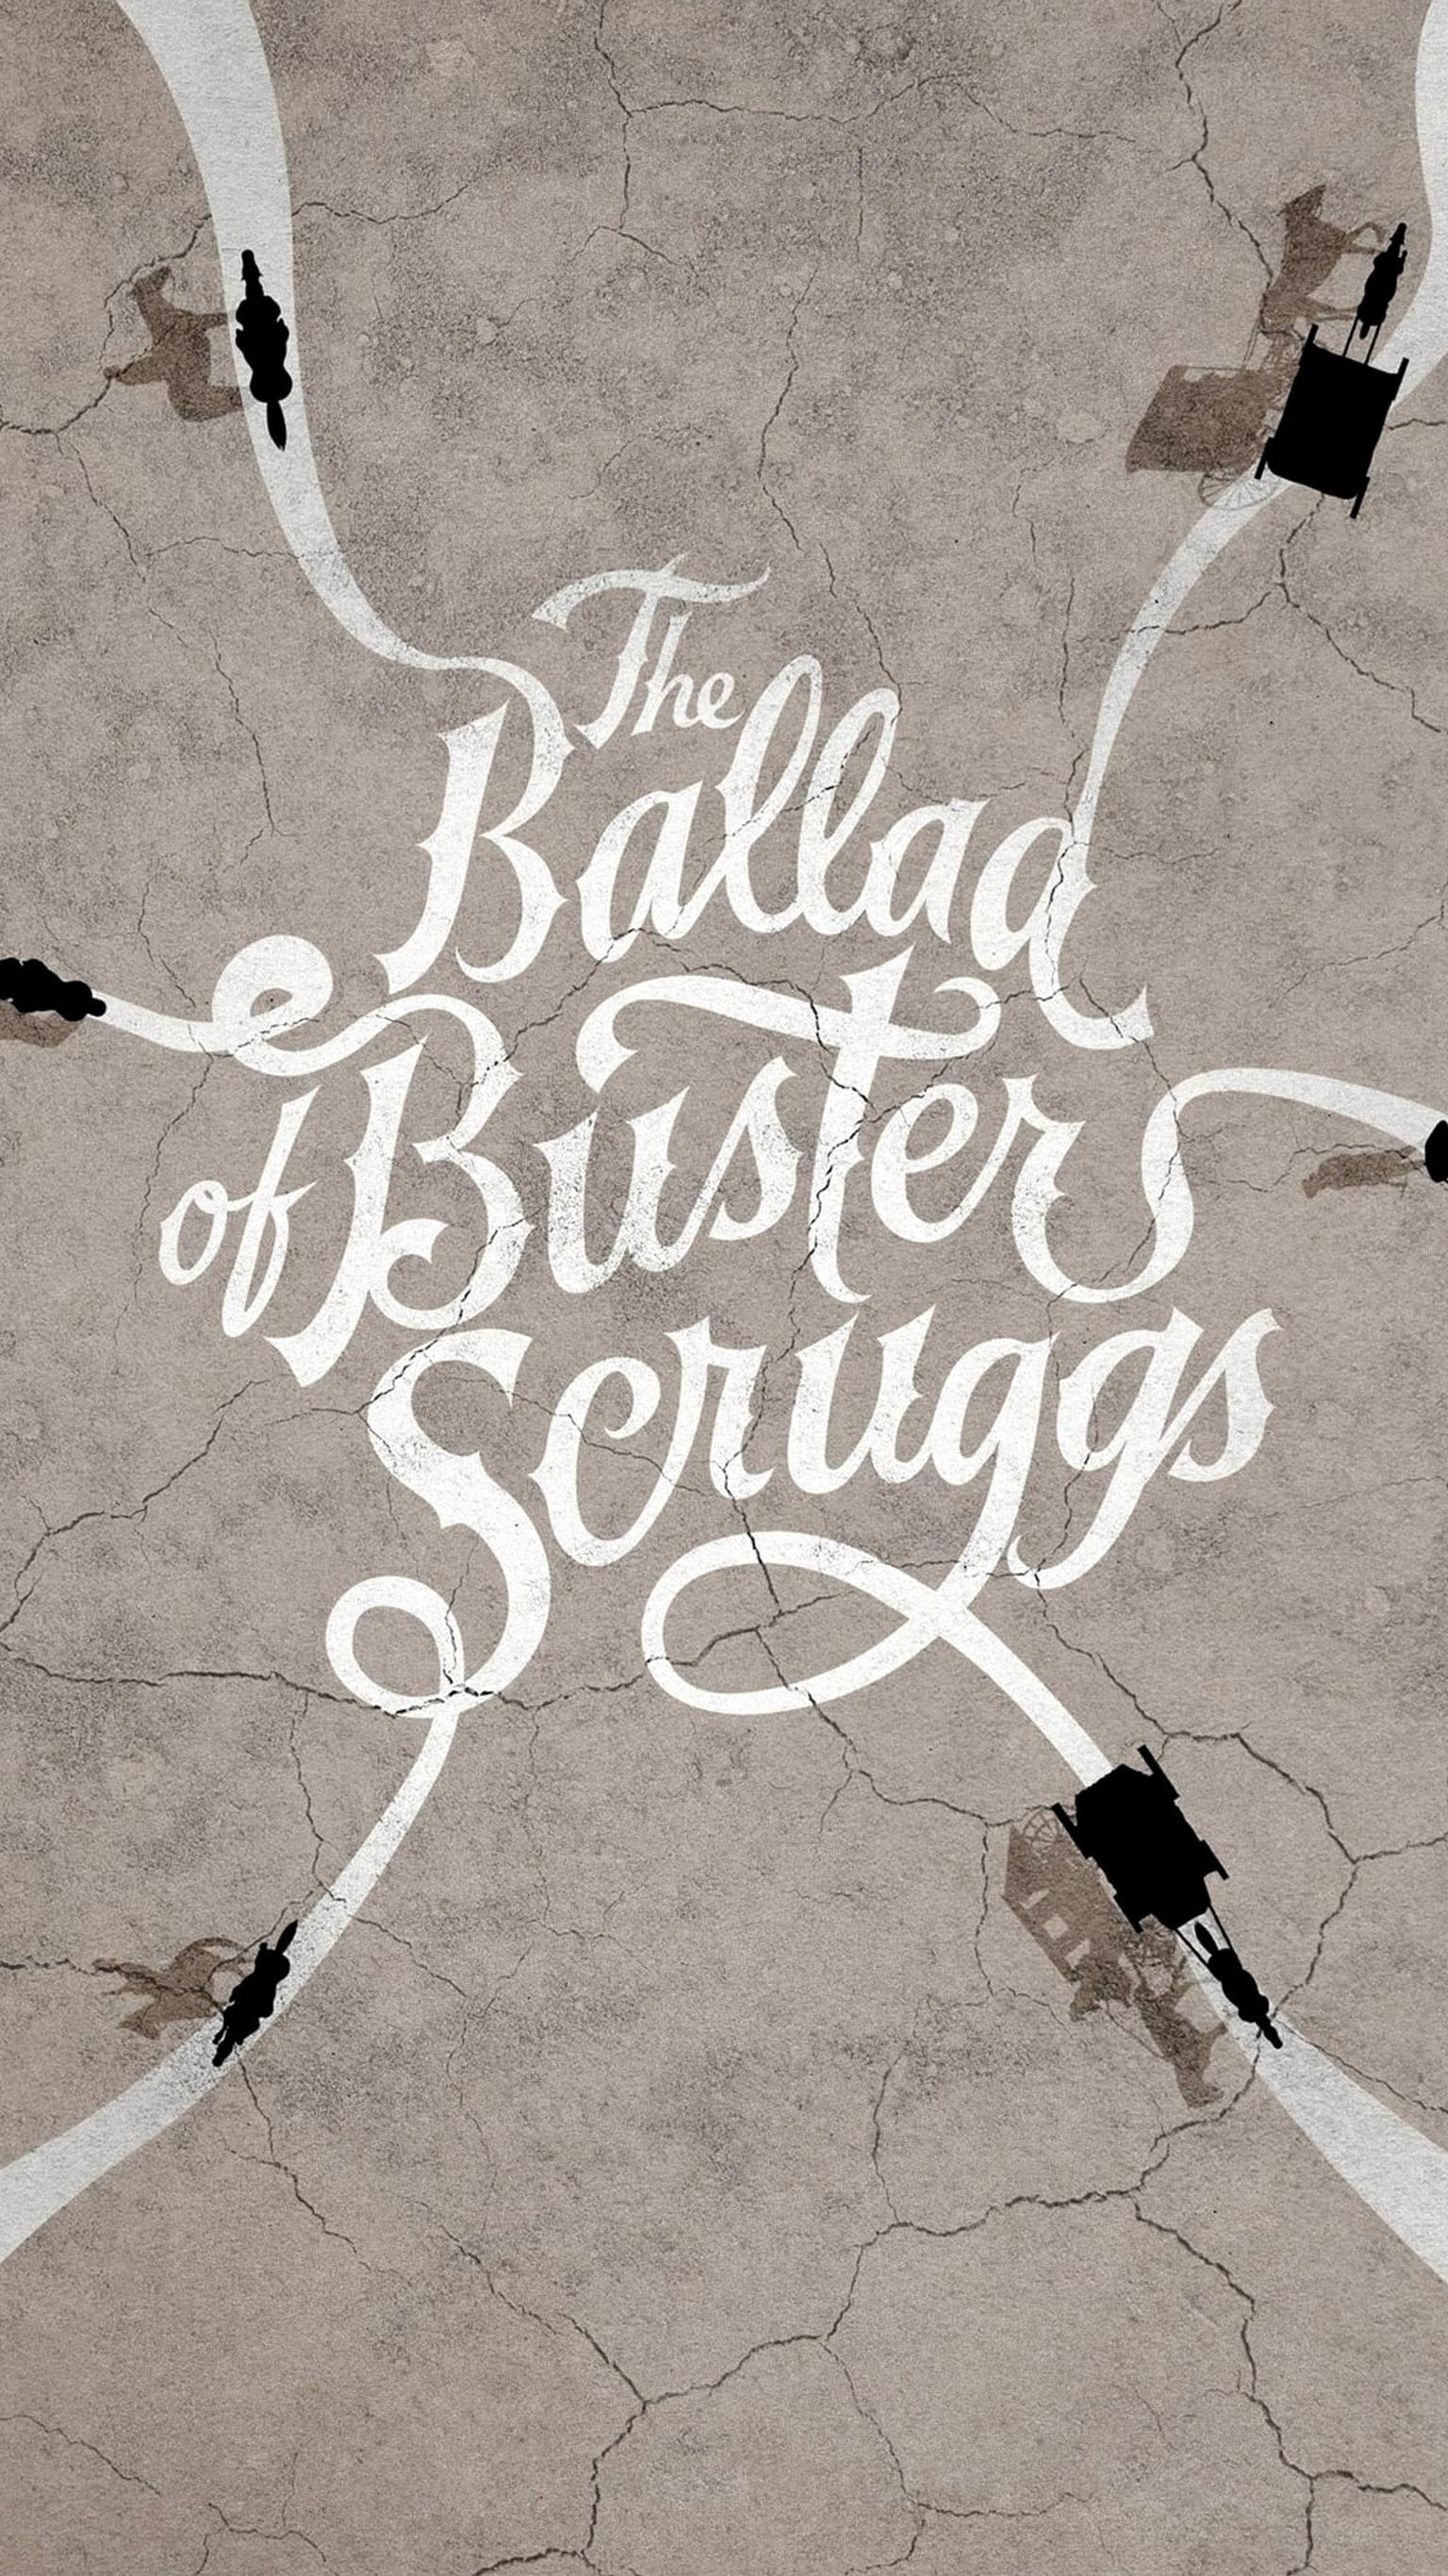 The Ballad of Buster Scruggs, Western anthology film, Unique storytelling, Memorable characters, 1540x2740 HD Phone